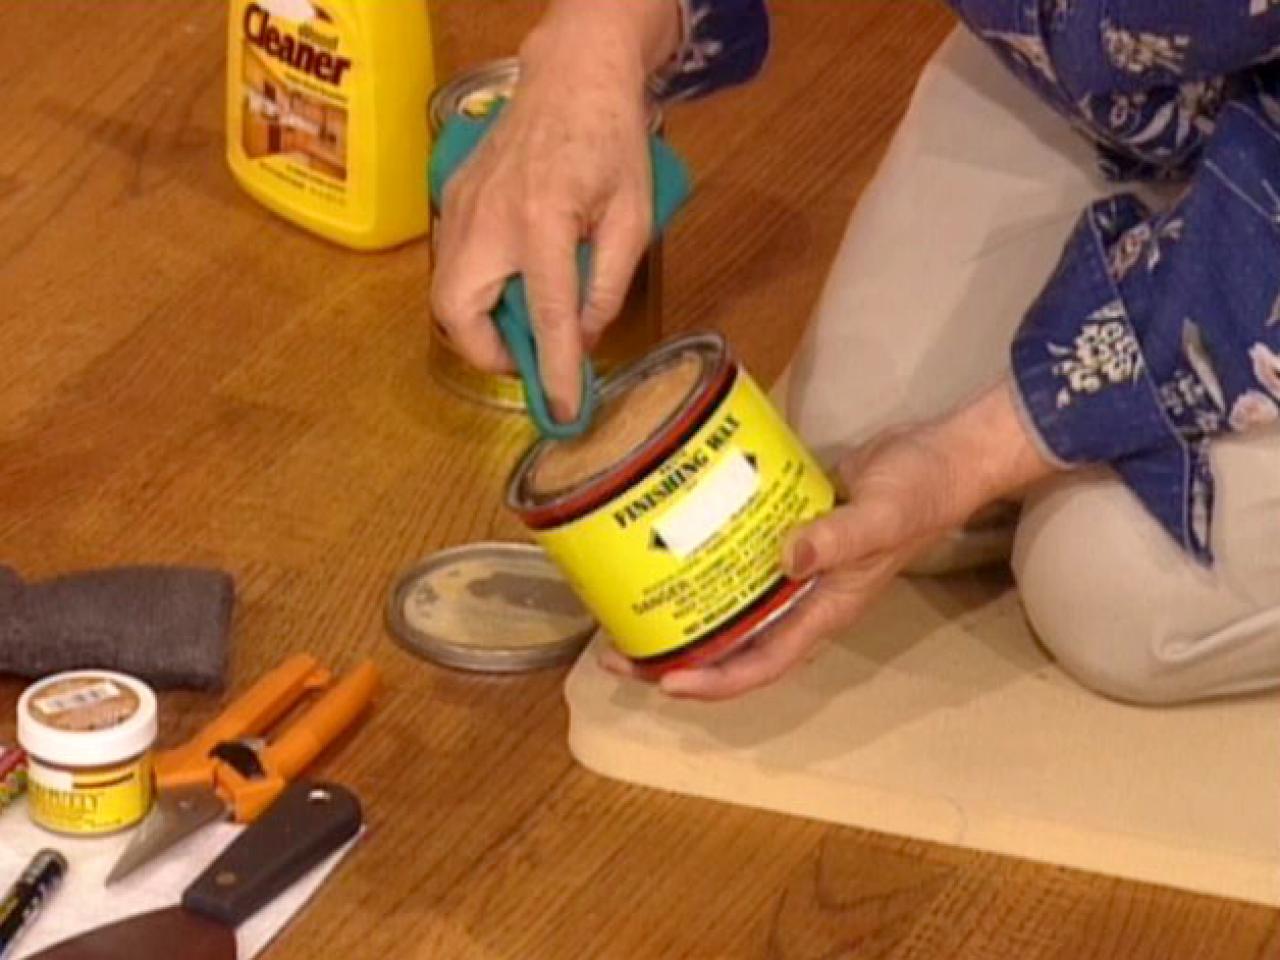 How To Touch Up Wood Floors Tos Diy, How To Remove Floor Polish From Hardwood Floors